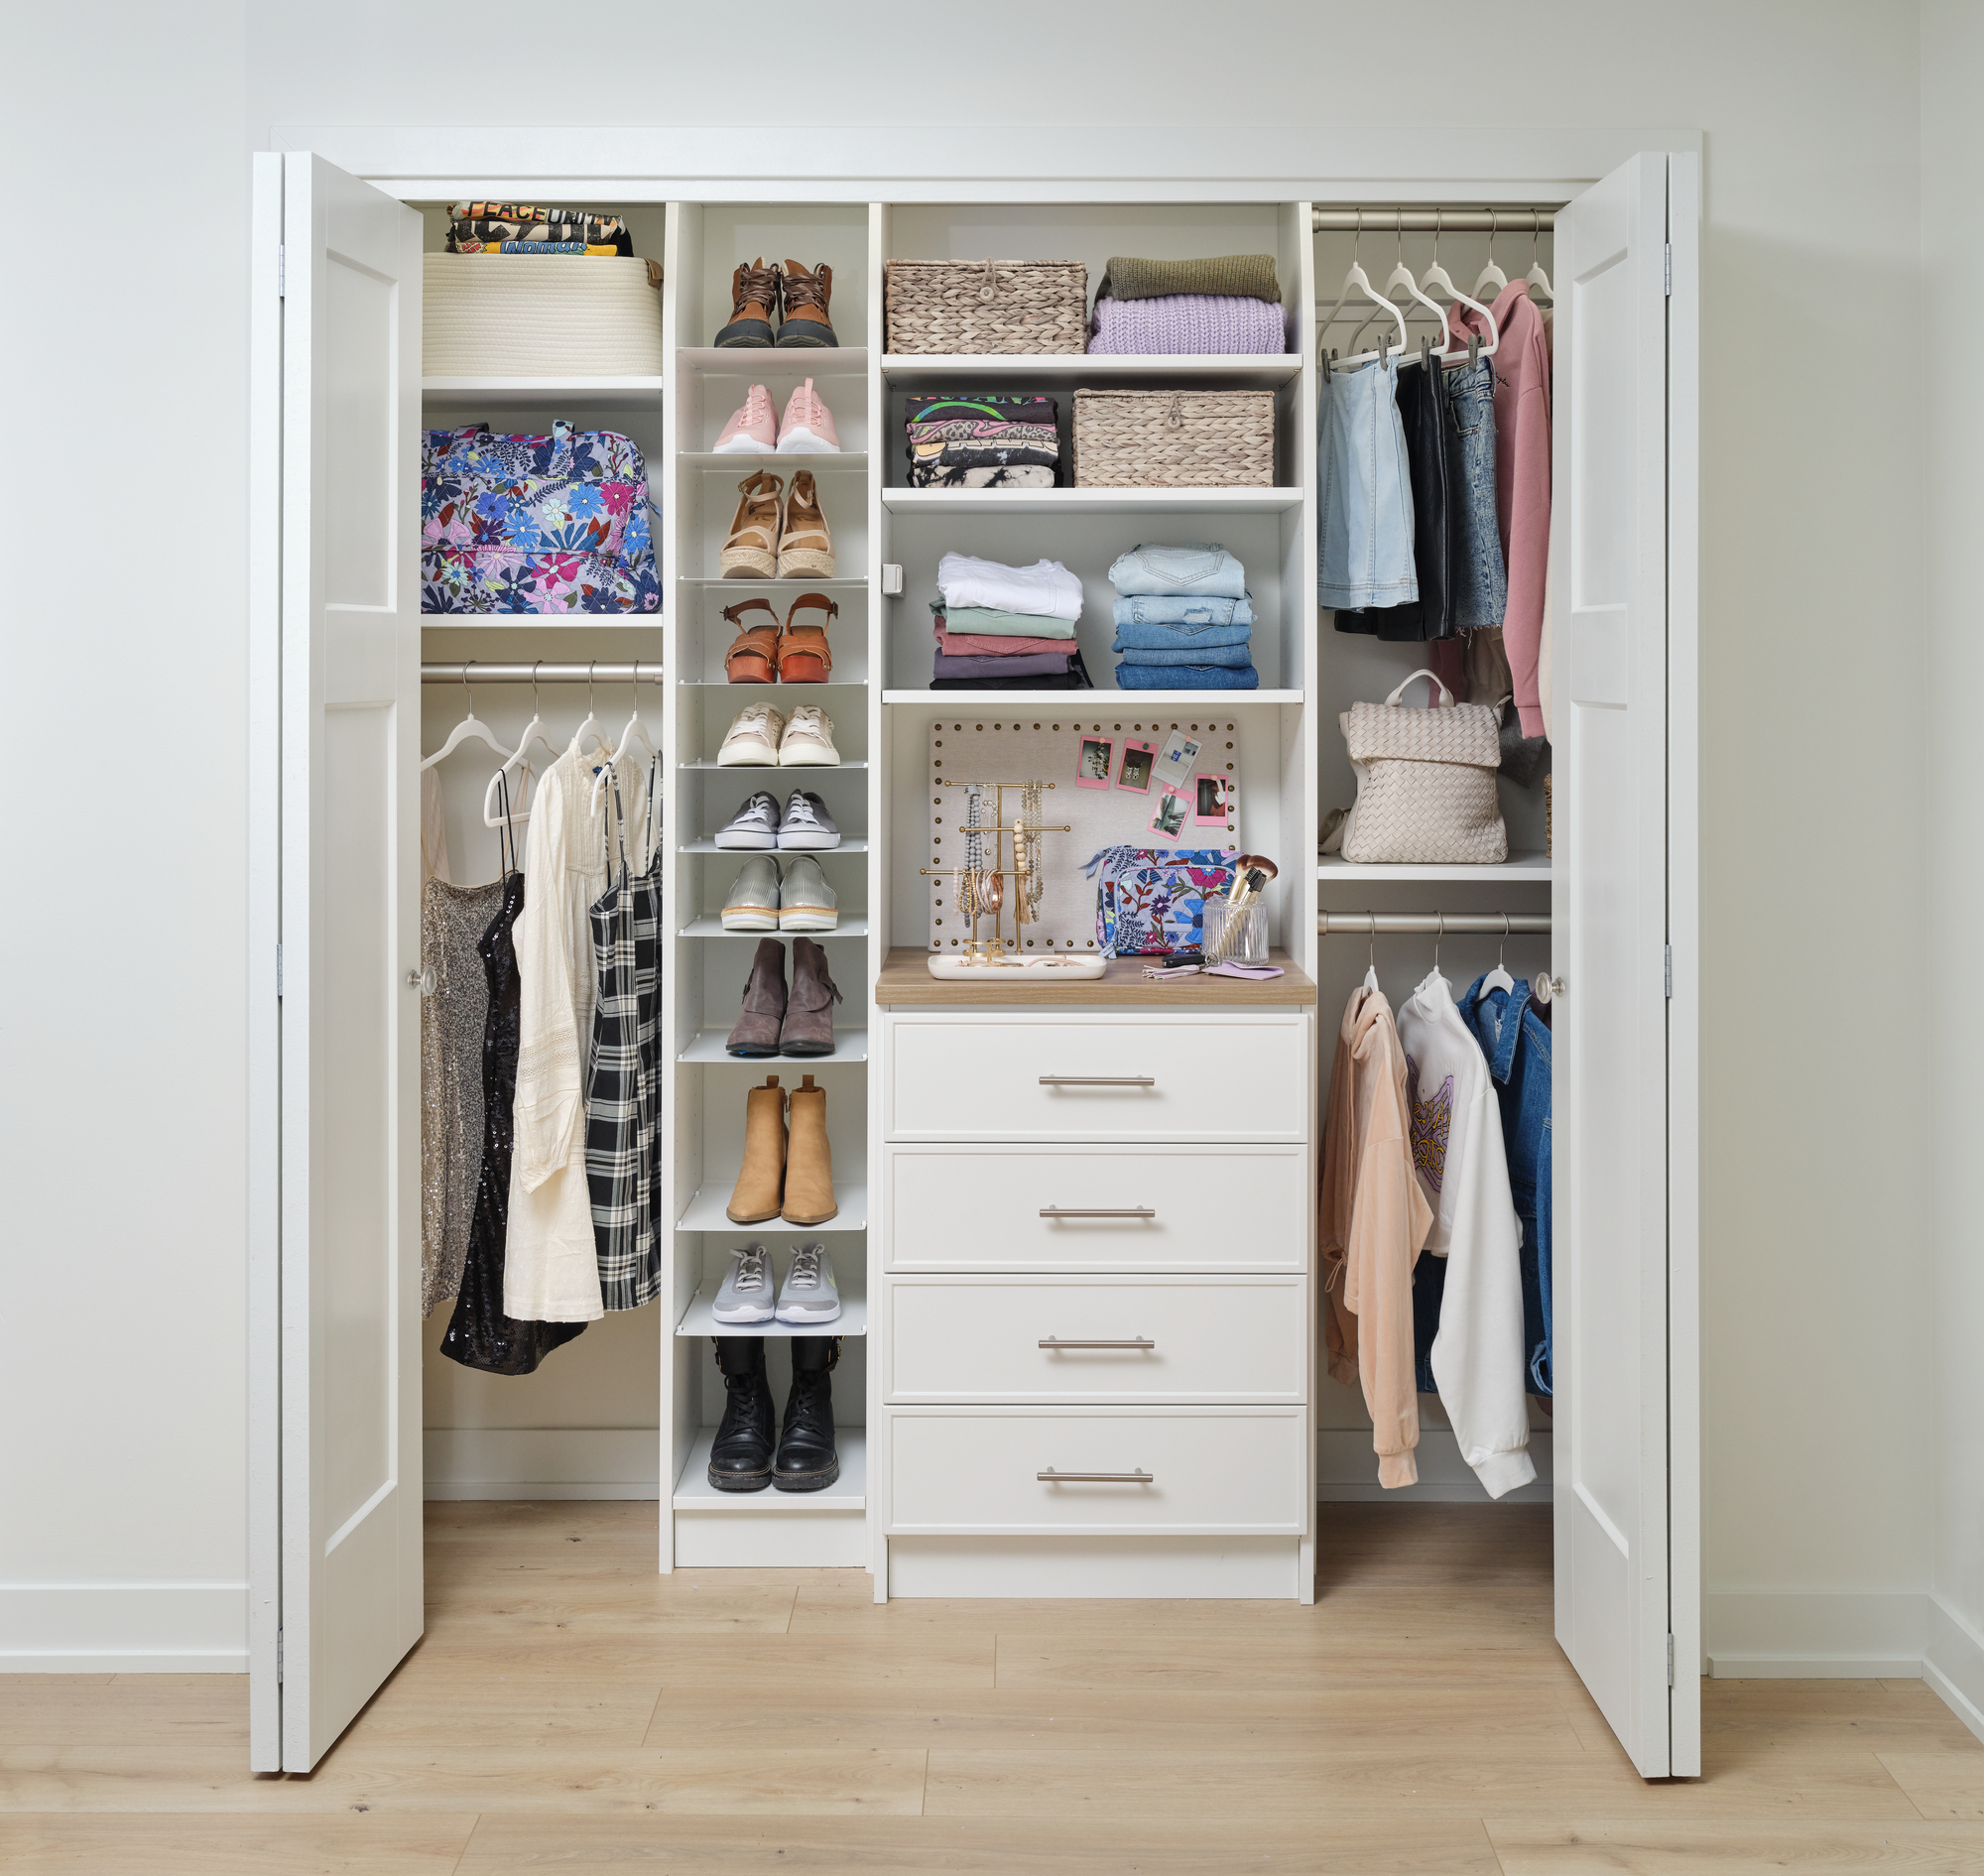 Teen girl's reach-in closet in white from Inspired Closets